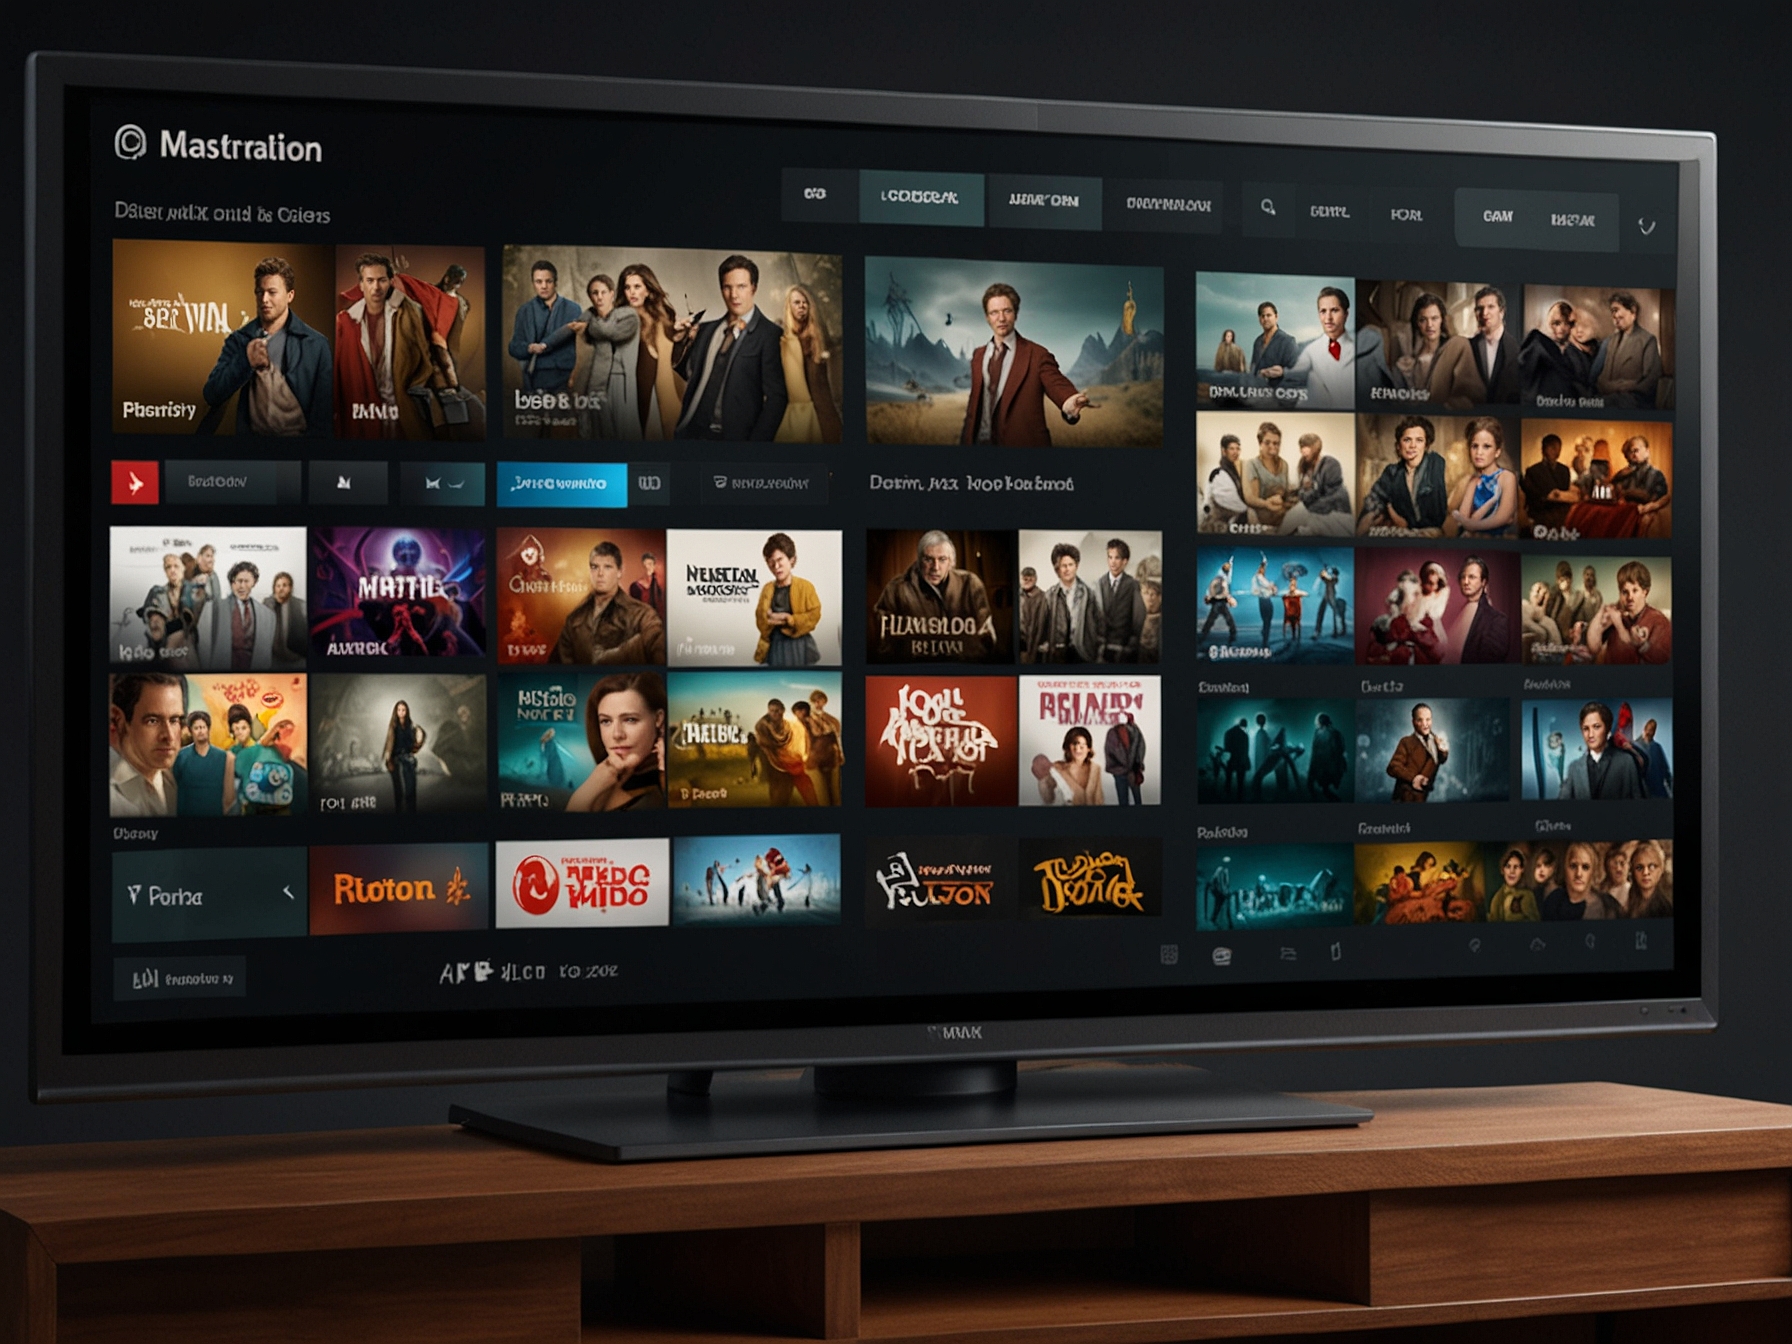 The user interface of the app on a TV screen, showing neatly categorized sections for Drama, Comedy, and Action genres, underscoring its easy-to-navigate design.